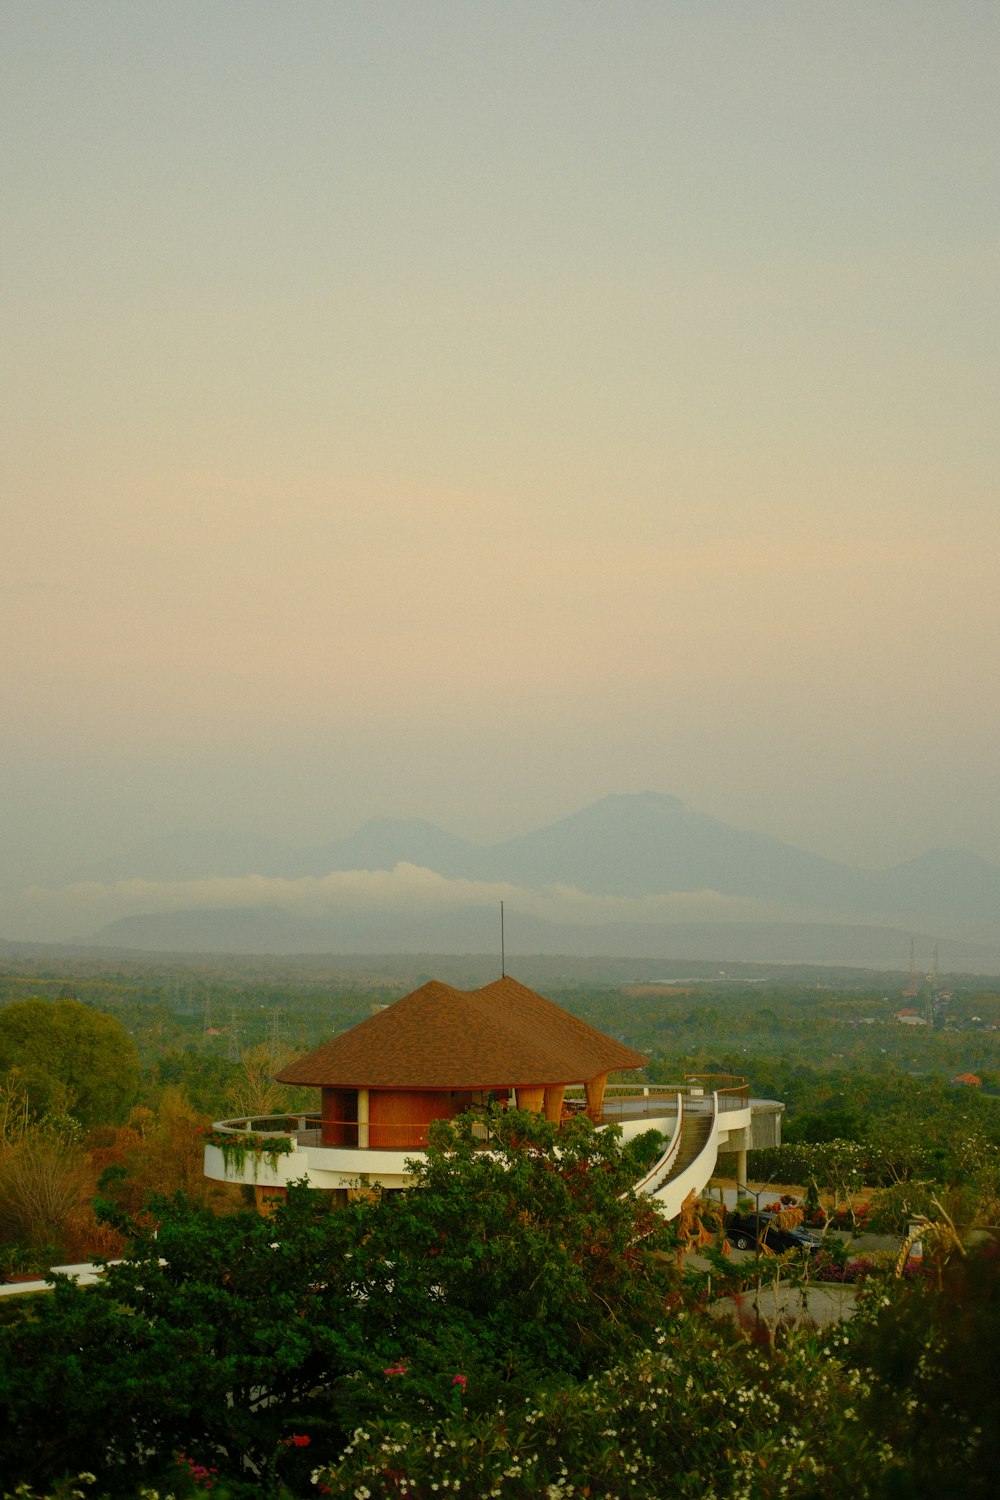 a view of a building with a thatched roof and mountains in the distance